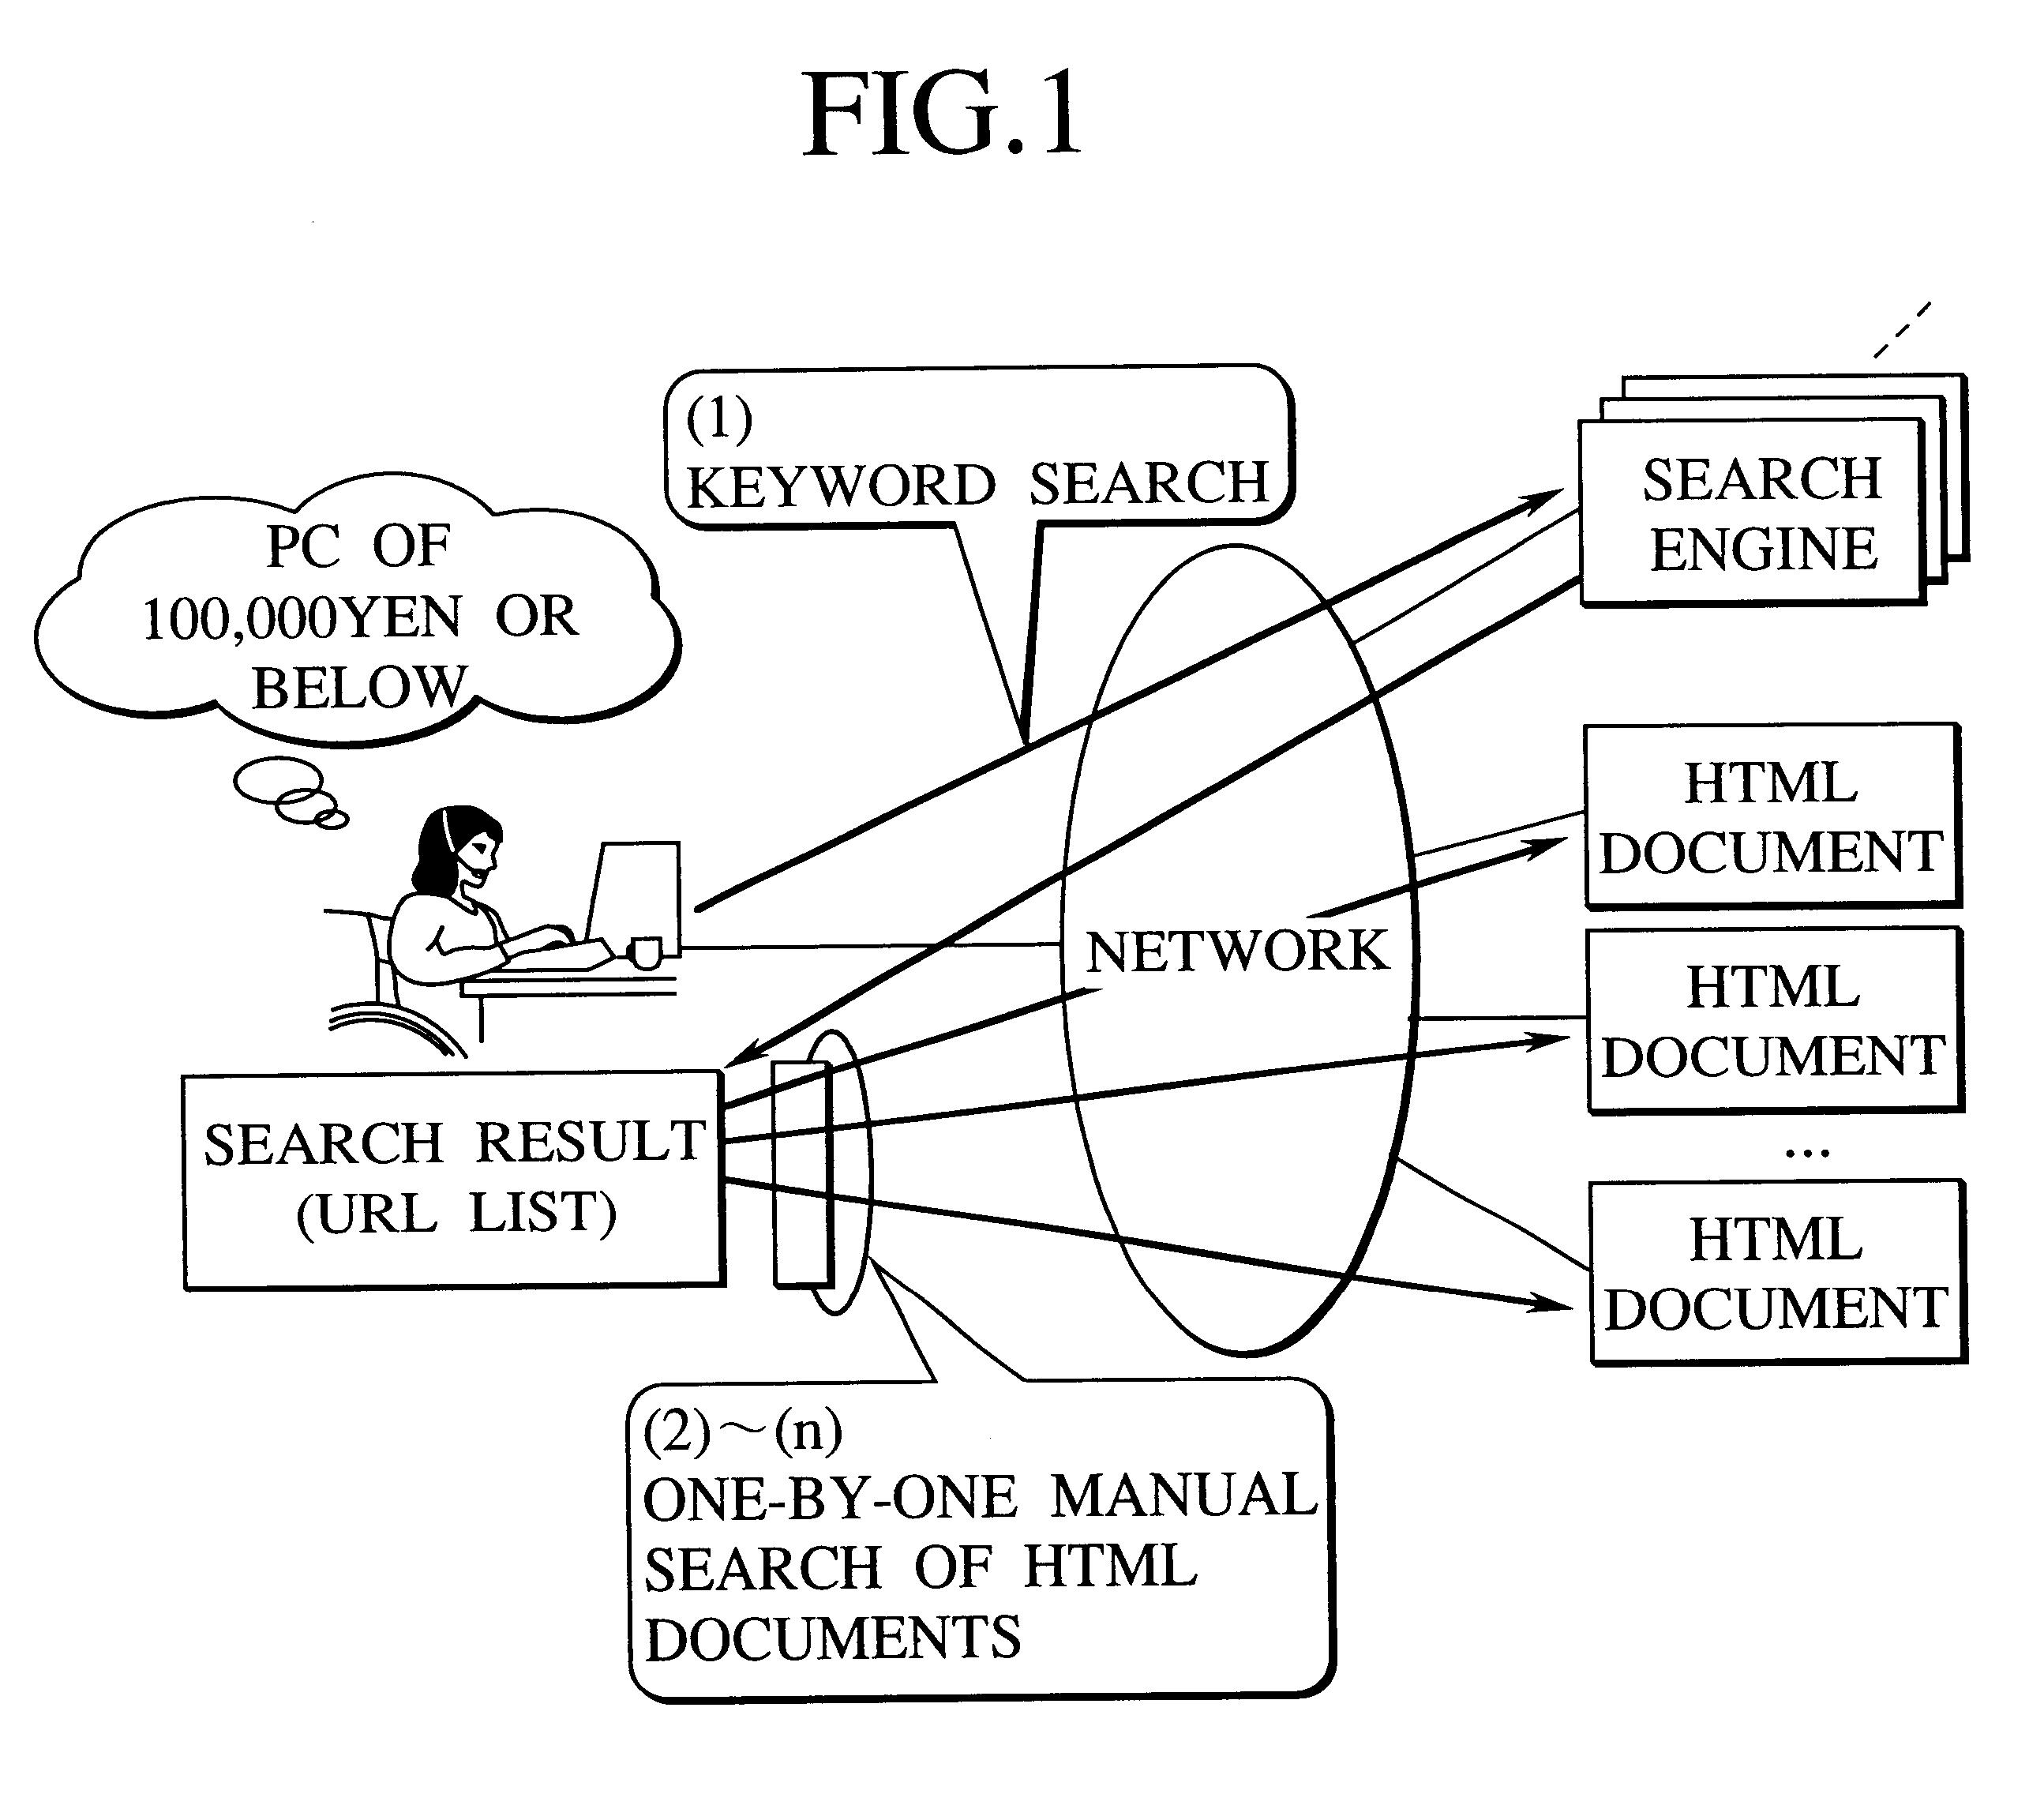 Integrated retrieval scheme for retrieving semi-structured documents